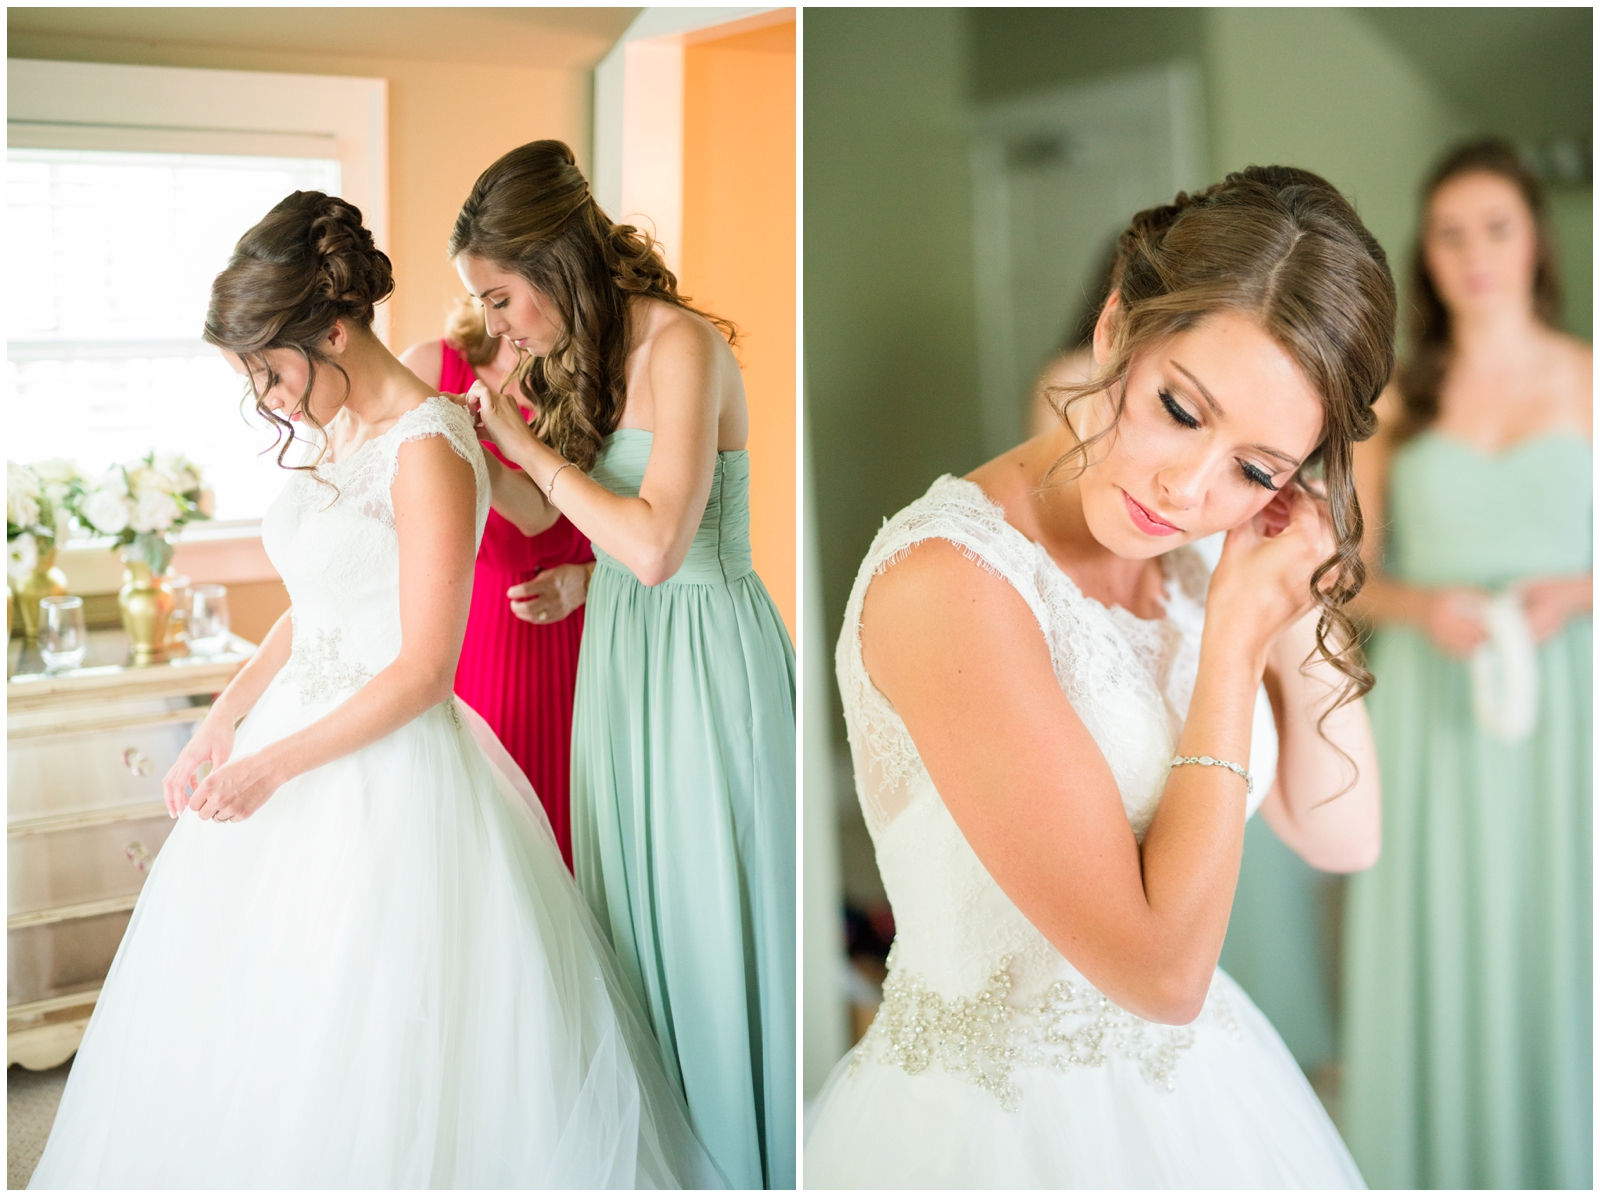 bridal details and getting ready wedding day planning tips 